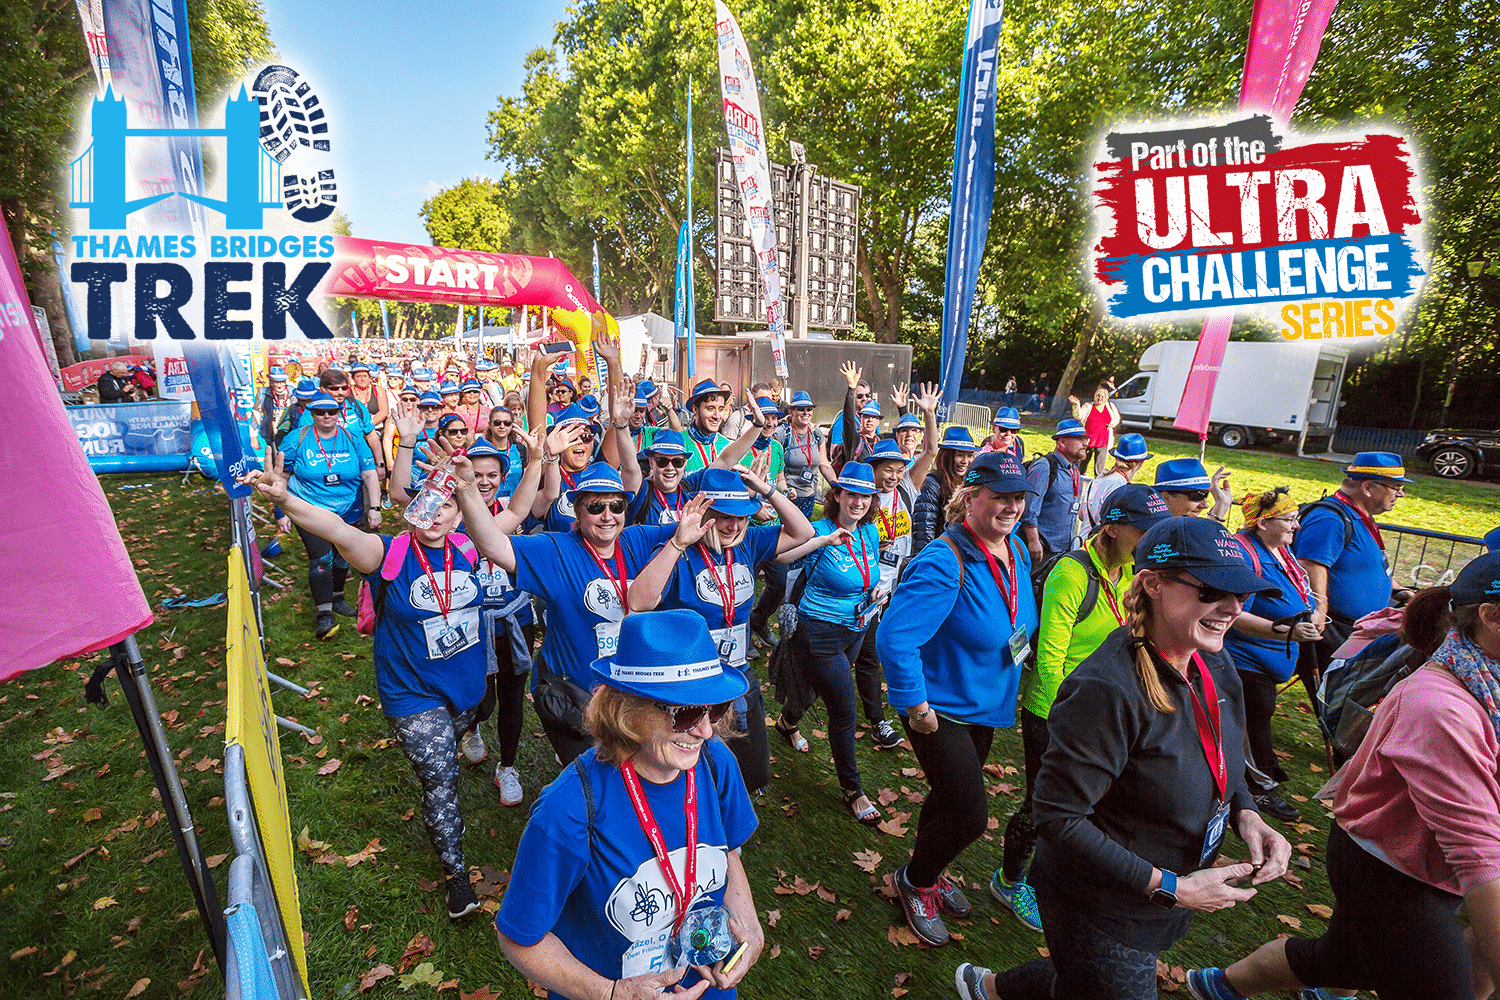 Image shows a crowd of walkers in blue t-shirts walking across the start line. Trees line the route. The 'Thames Bridges Trek' logo is in blue a the top left. The top right reads 'part of the Ultra Challenge Series'